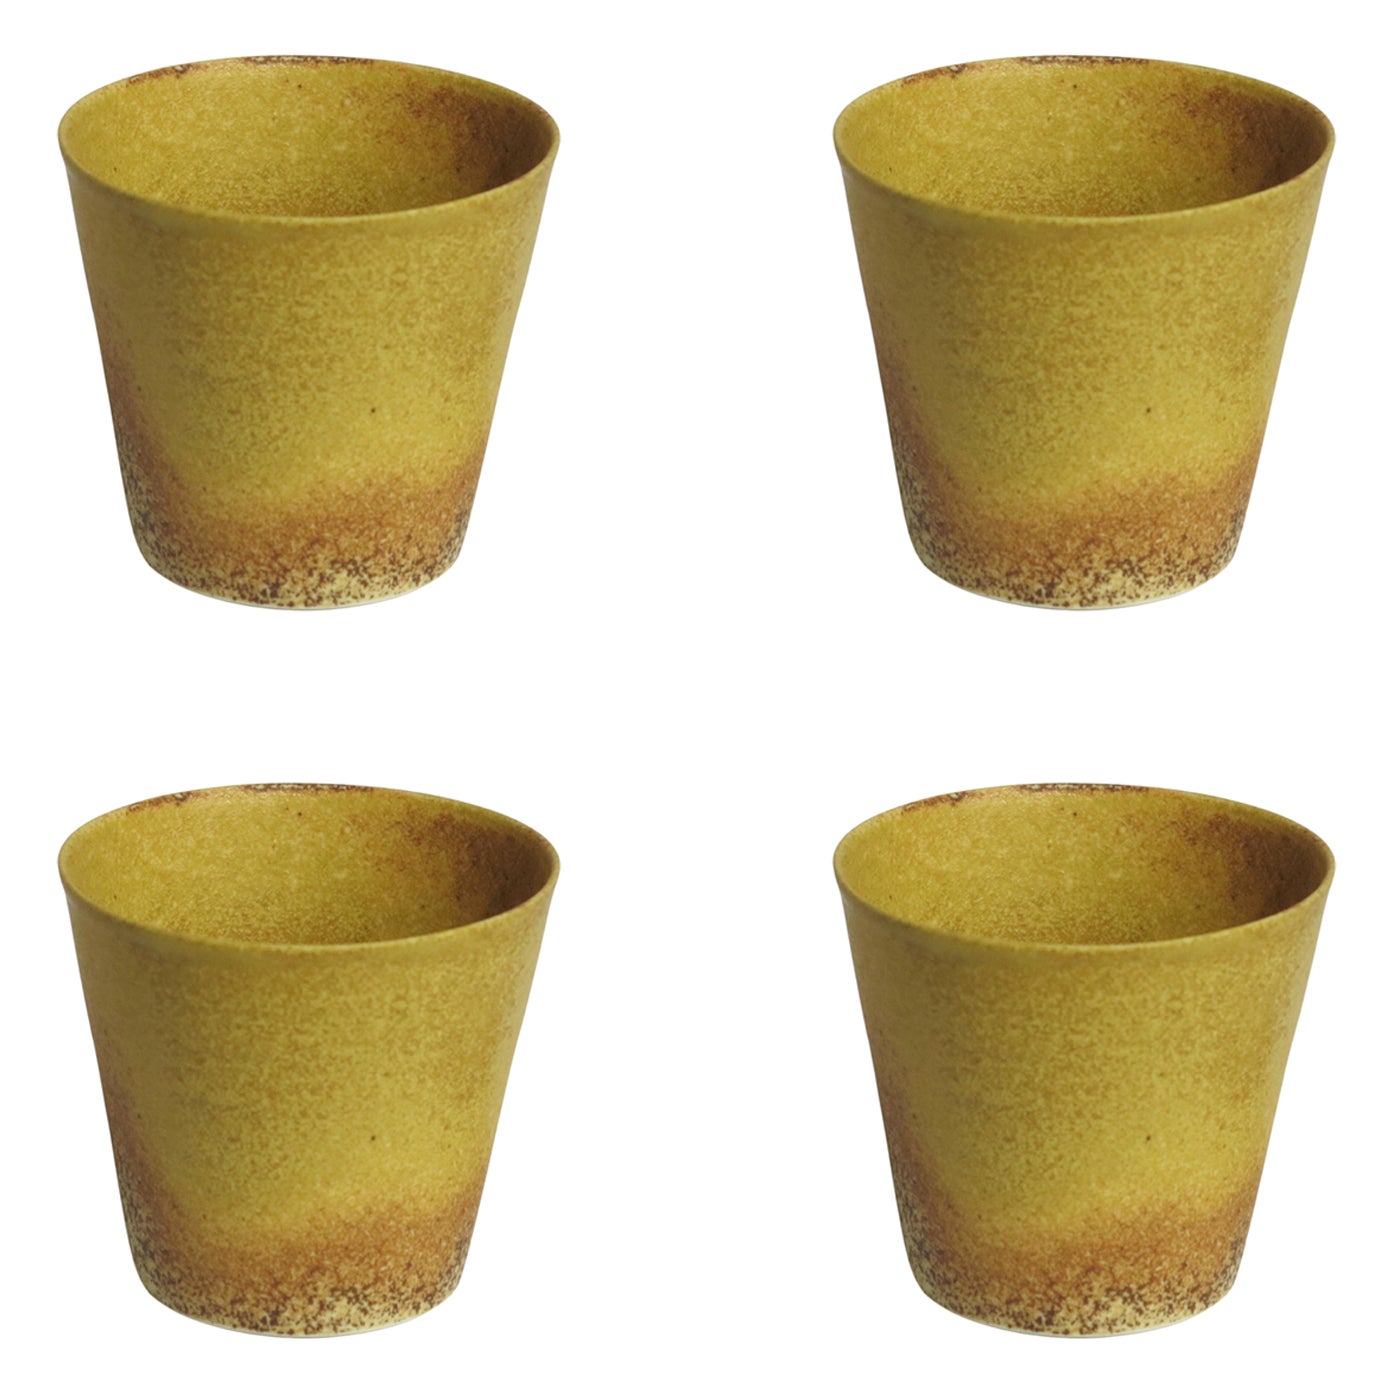 Set of 4 Porcelain Yellow Coffee Cups by Cica Gomez